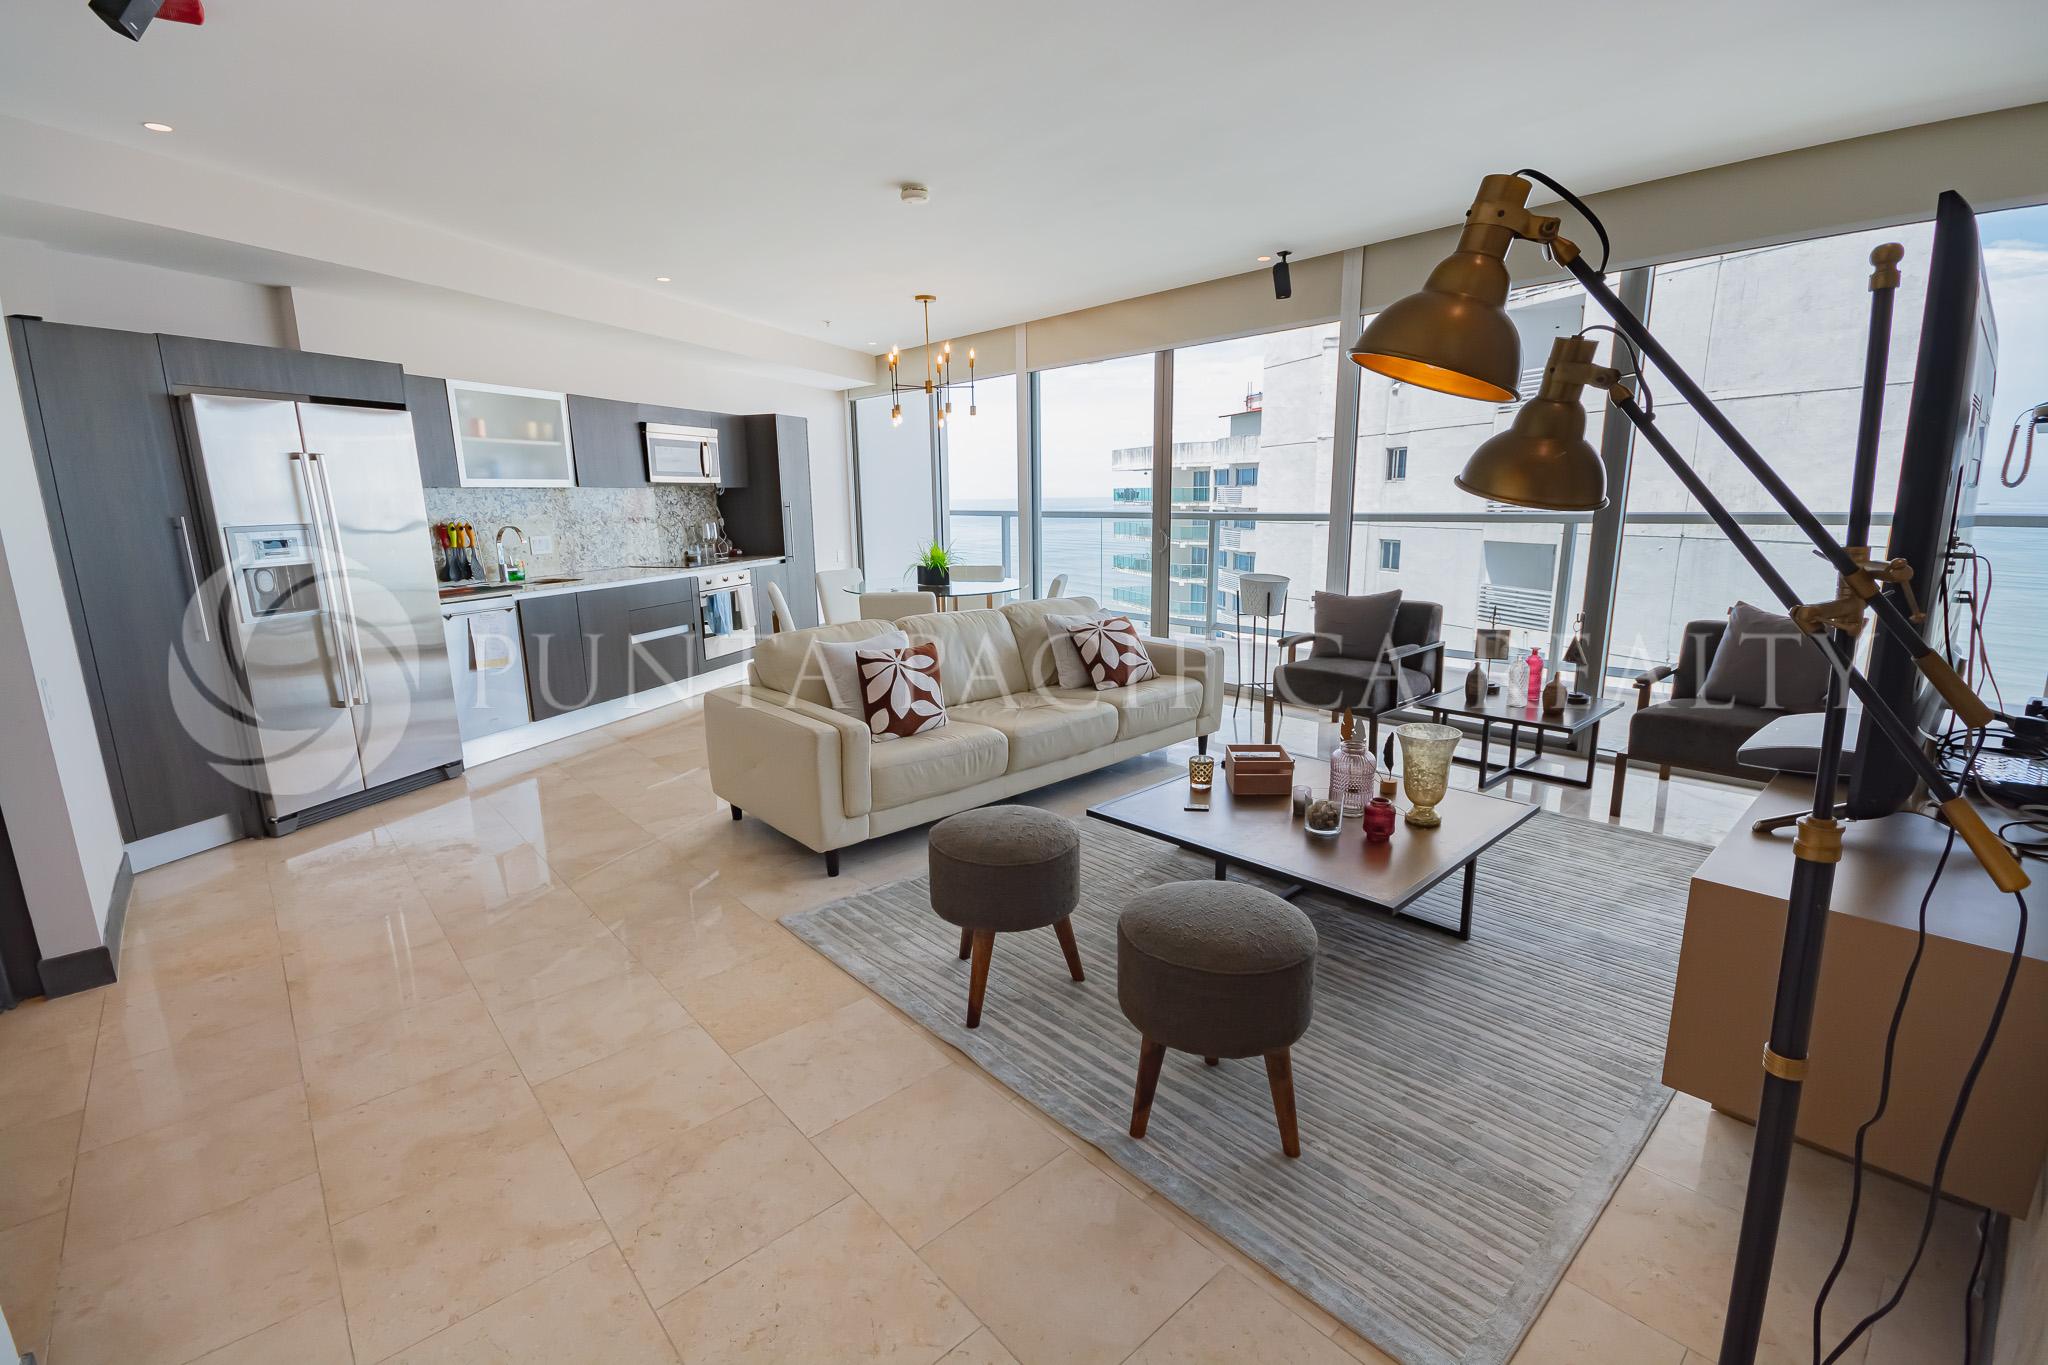 Luxurious 1-Bedroom Apartment for Rent | Fully Furnished | Stunning Ocean and Panama Canal Views | PH The Ocean Club (Formerly Trump Tower) – Panama City | Upgraded with Designer Furniture and Surround Sound System